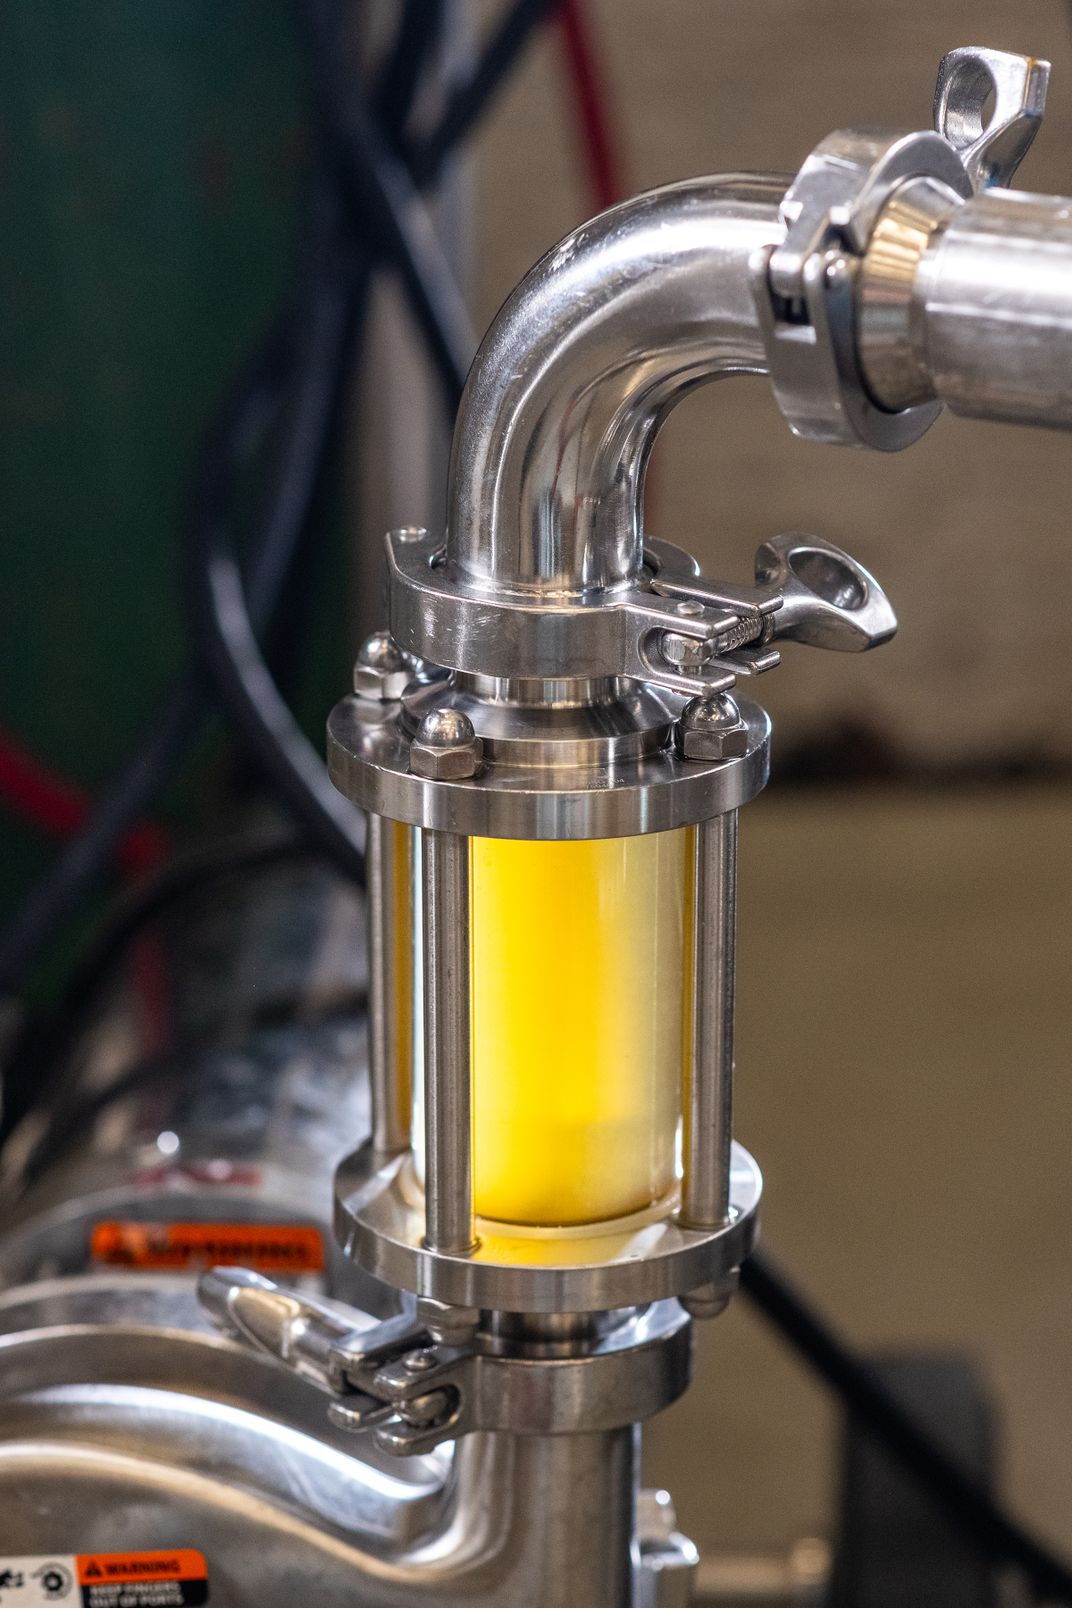 The sight glass allows mead makers to observe how the honey and water are blending in the tank without having to open the system.